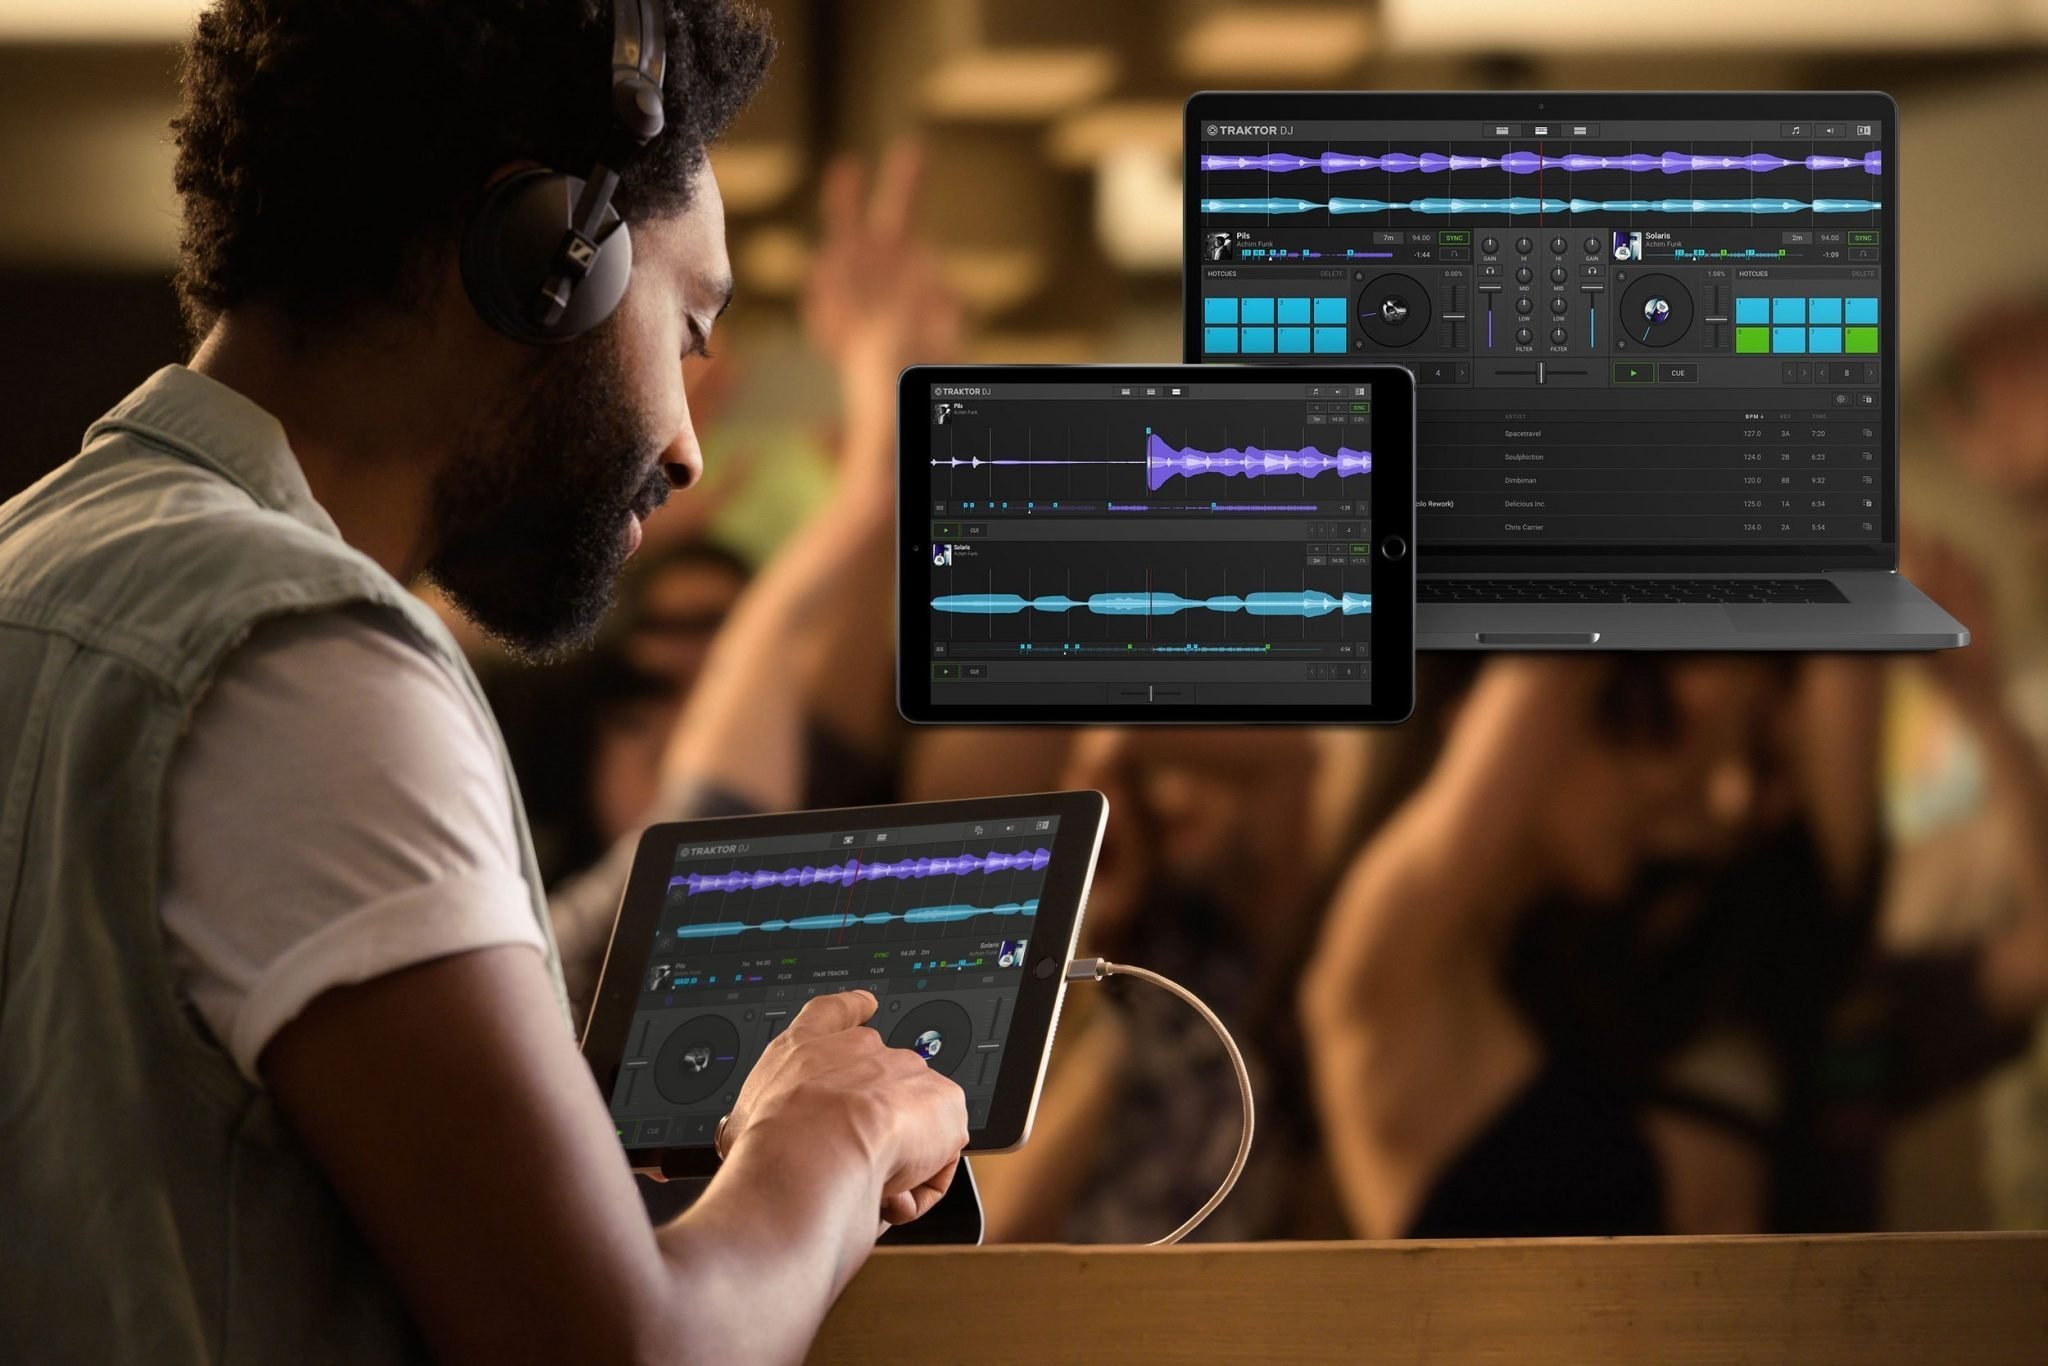 NAMM 2019: So about that new version of Traktor...